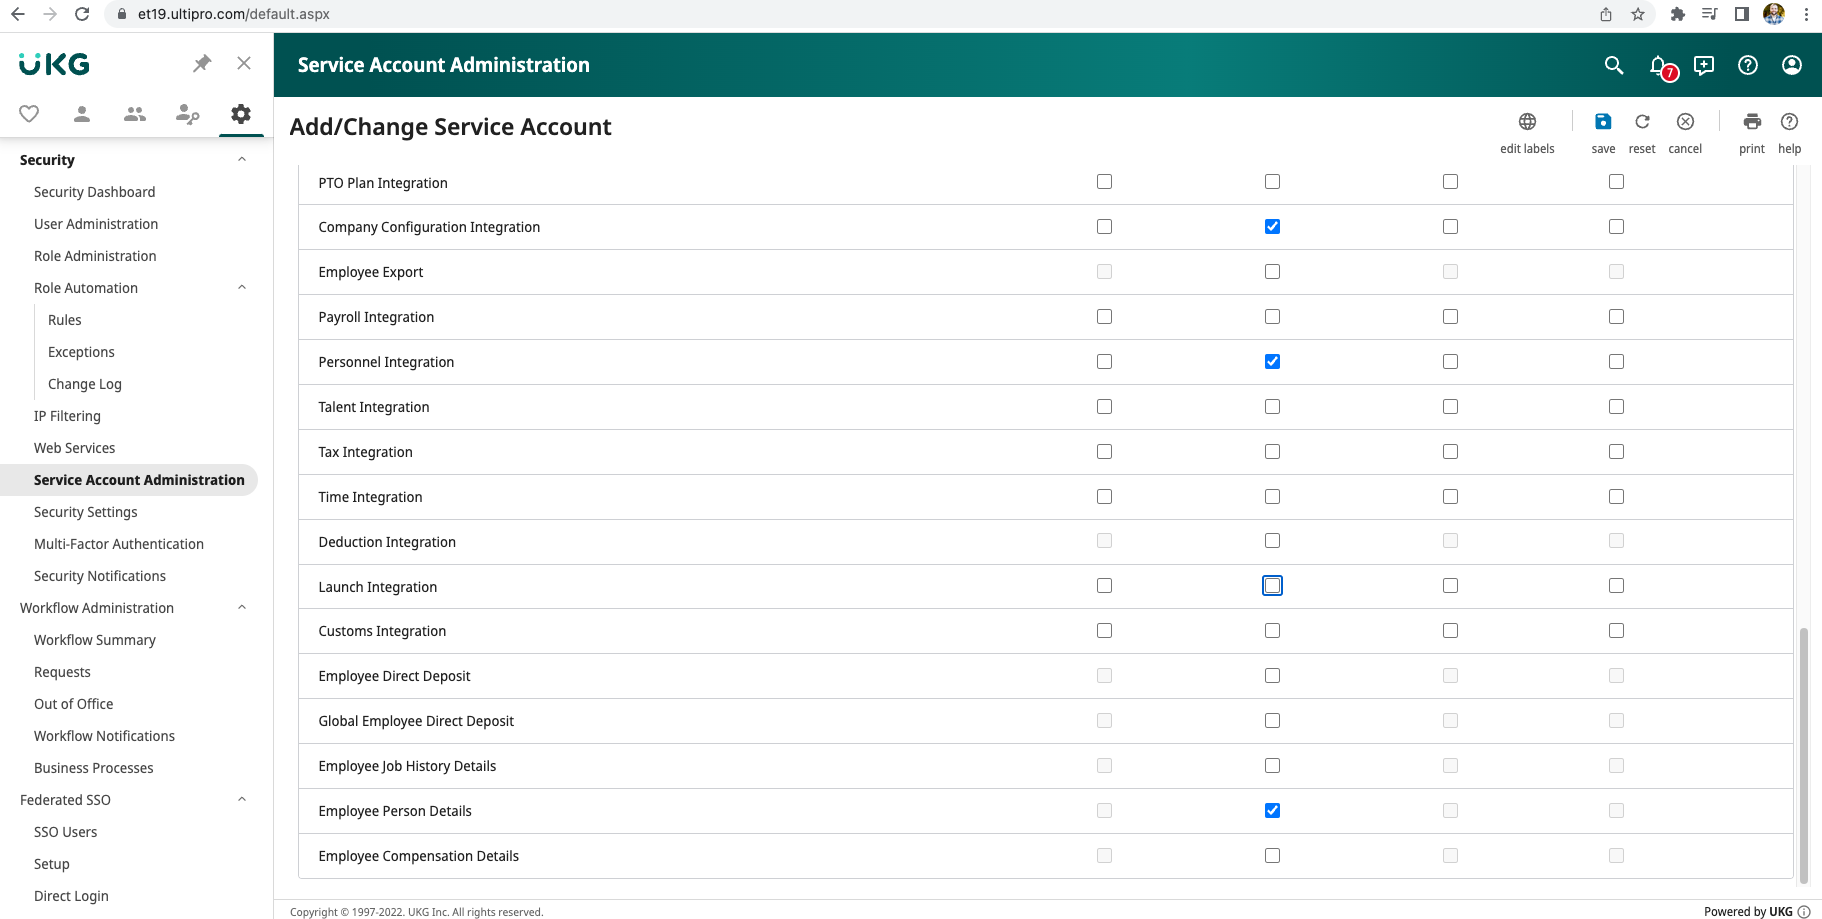 Screenshot of UKG Service Account Administration on Add/Change Service Account page. The page shows different permissions options with checkboxes.